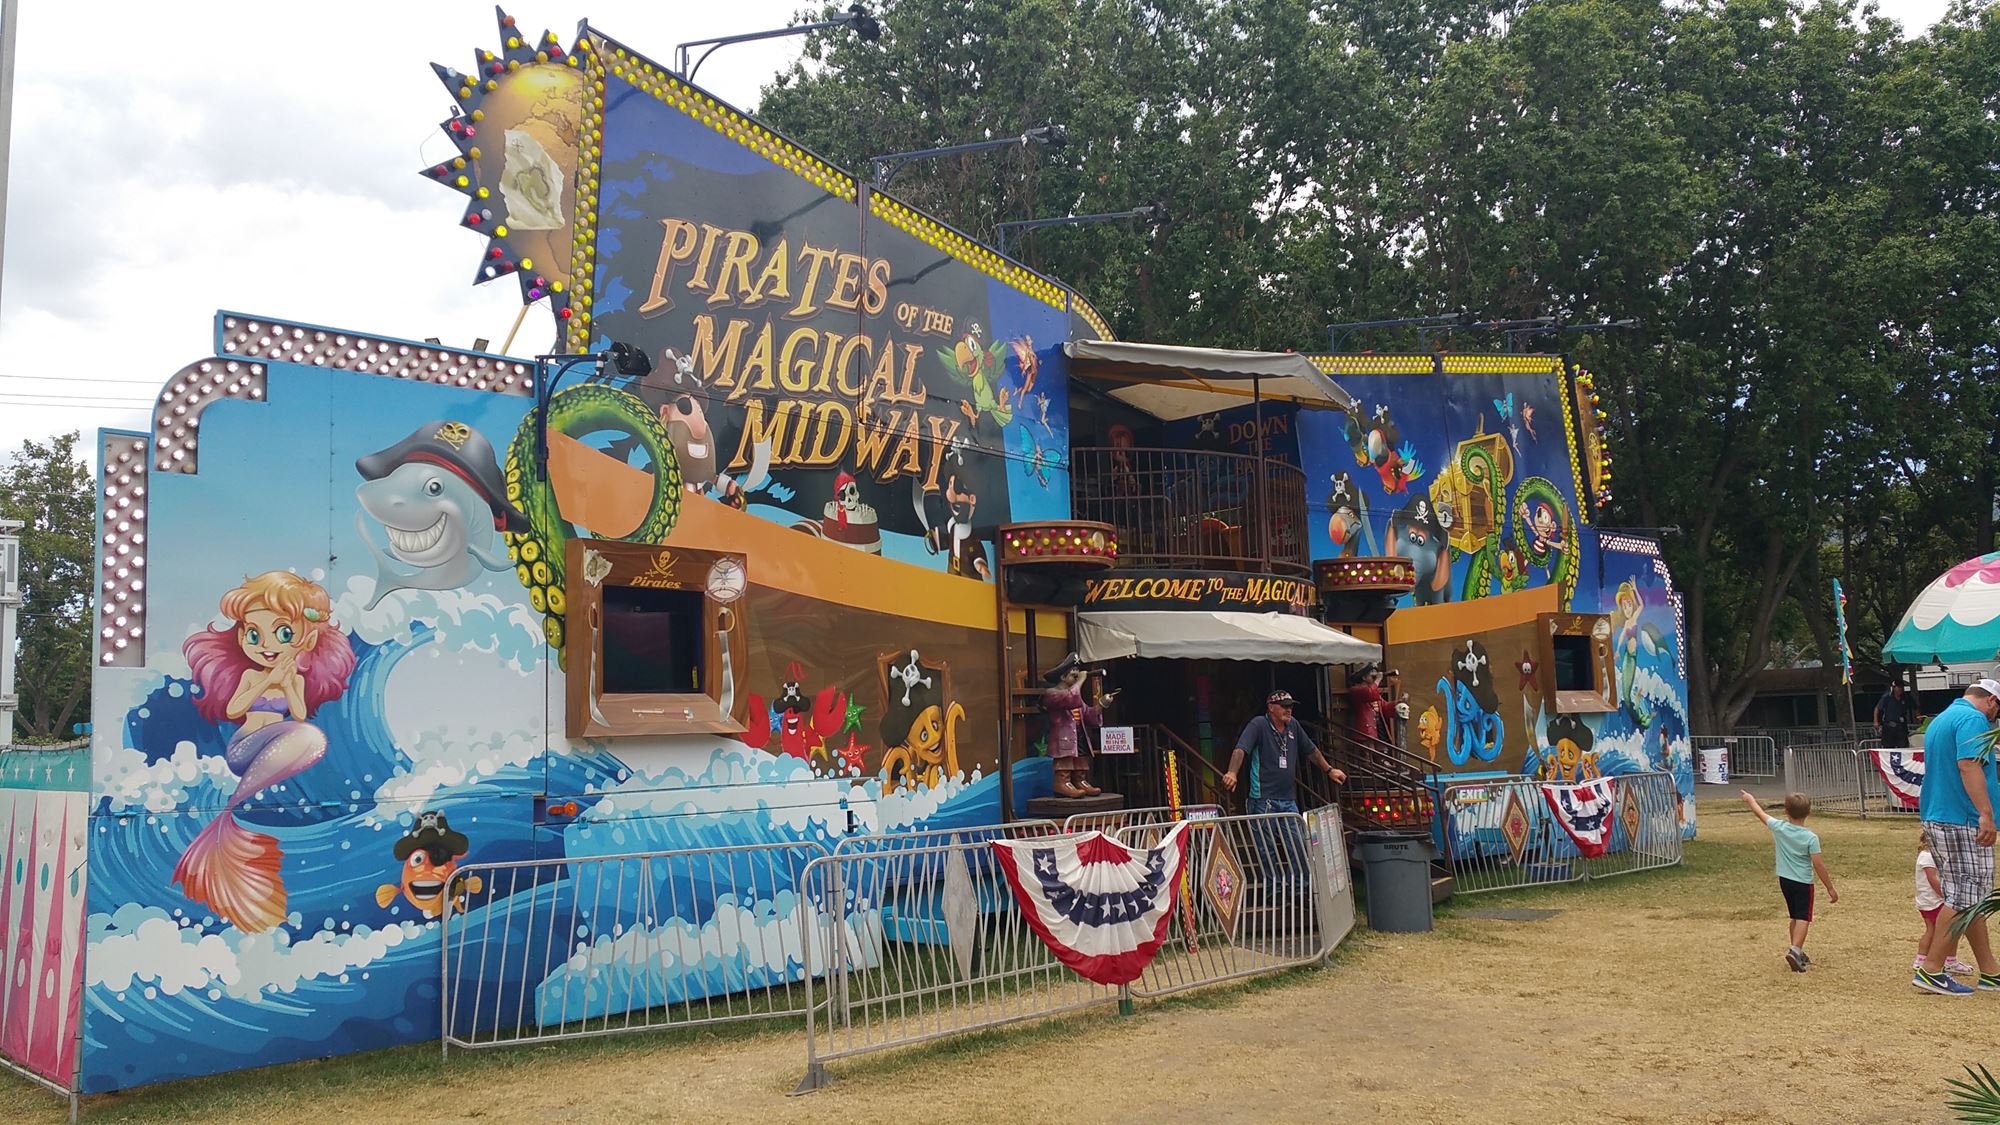 Pirates of the Midway Funhouse